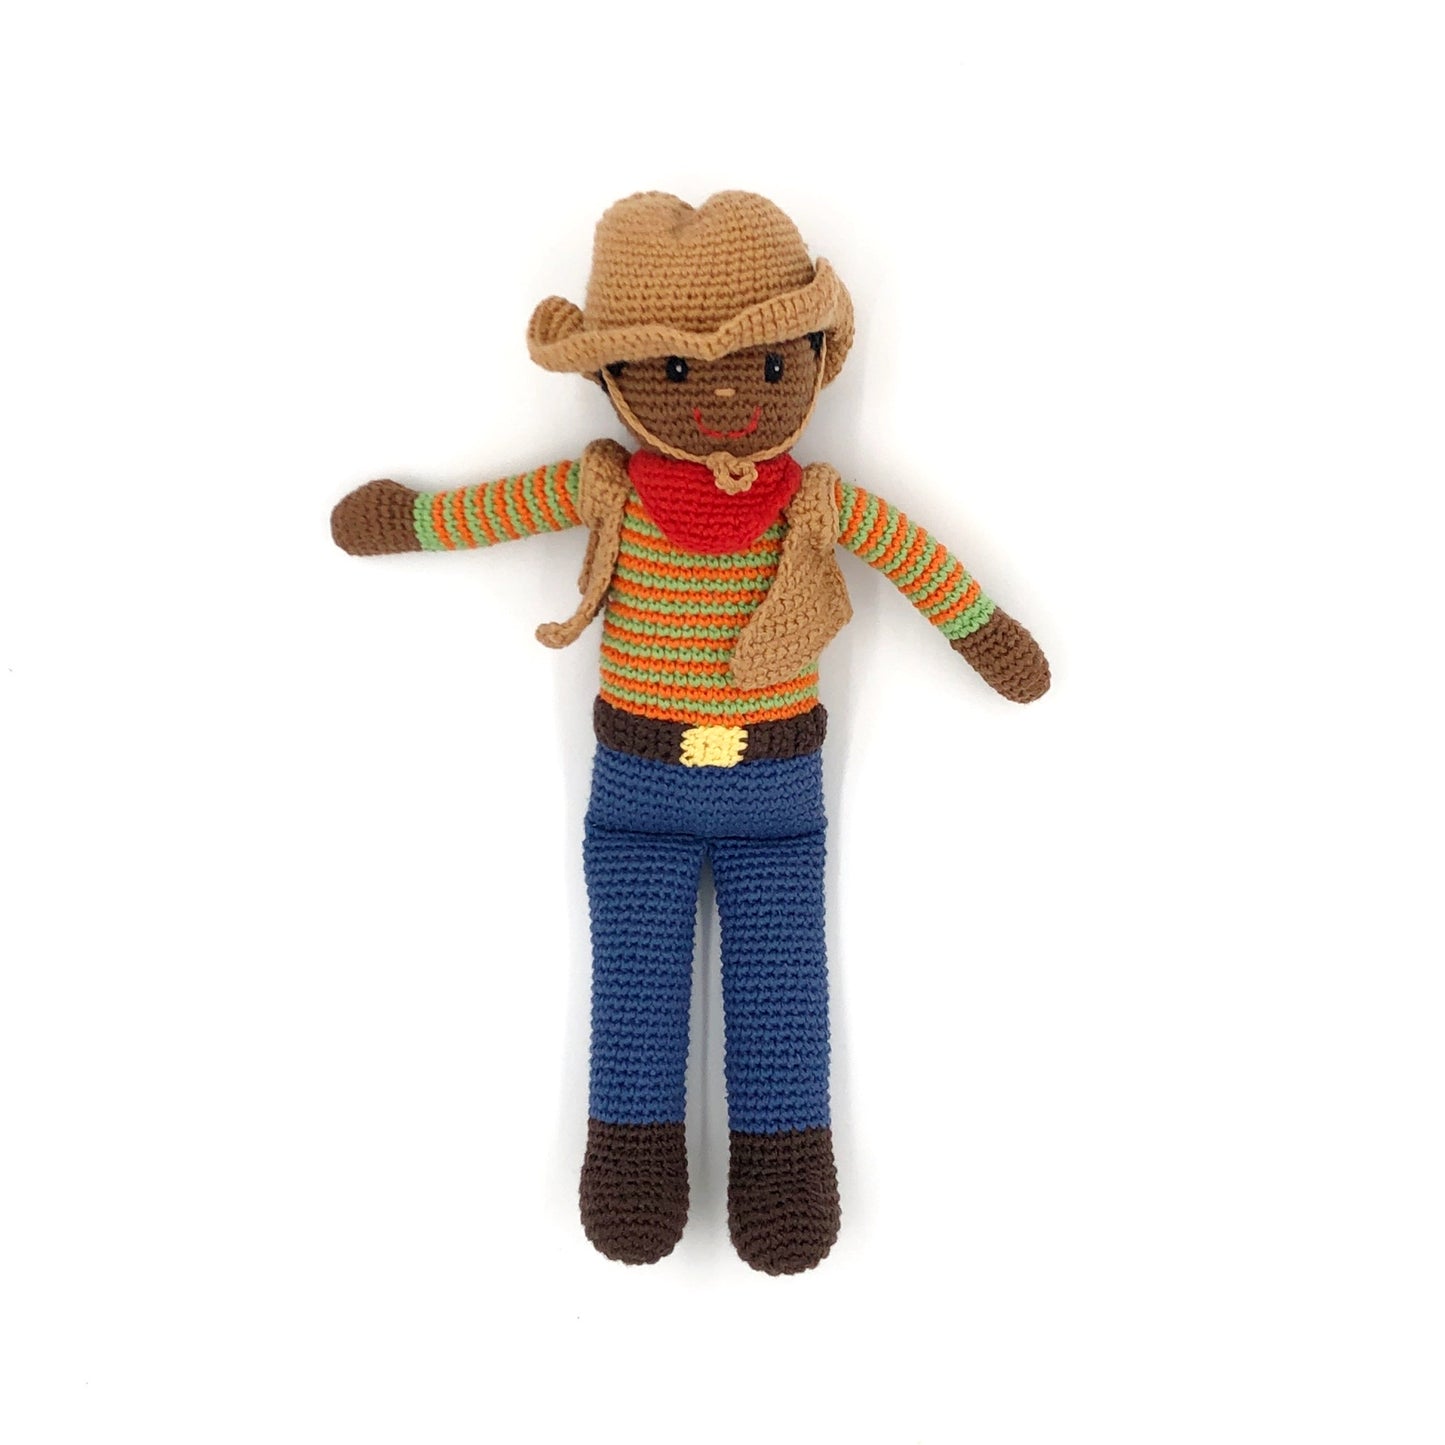 Cowboy doll with brown jacket, blue jeans and brown hat